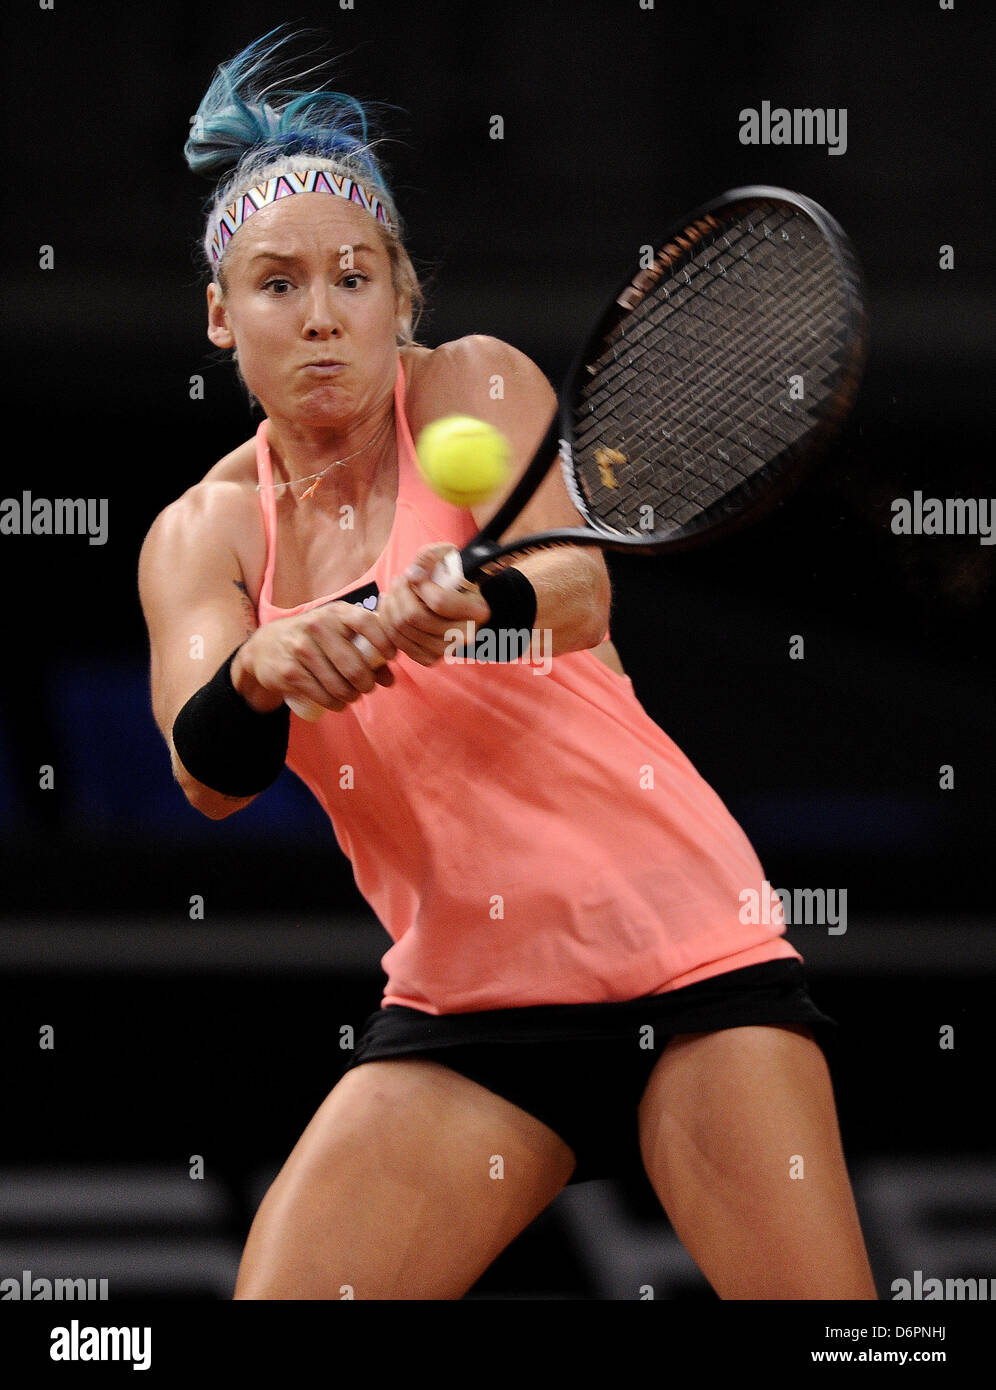 The USA's Bethanie Mattek-Sands serves during the match against Germany's Friedsam at the WTA Porsche Tennis Grand Prix in the Porsh Arena in Stuttgart, Germany, 22 April 2013. Photo: DANIEL MAURER Stock Photo